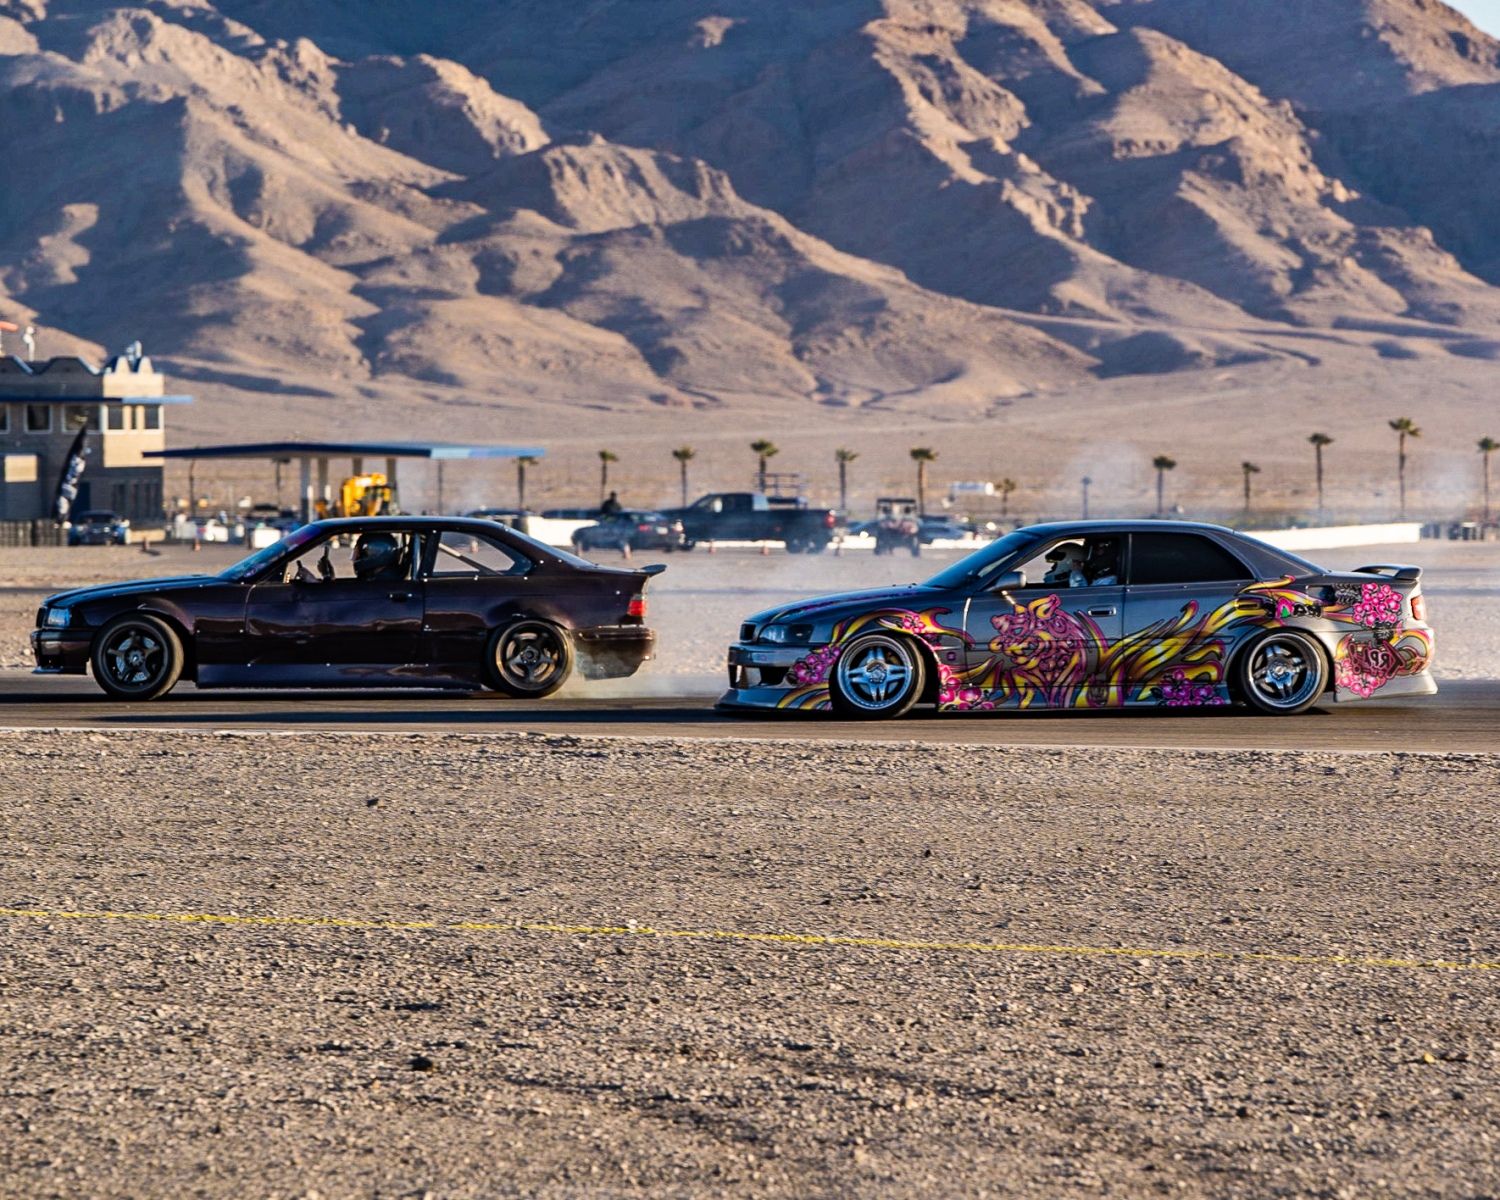 Another fast paced day of burning rubber and smoke at Vegas Drift’s January event